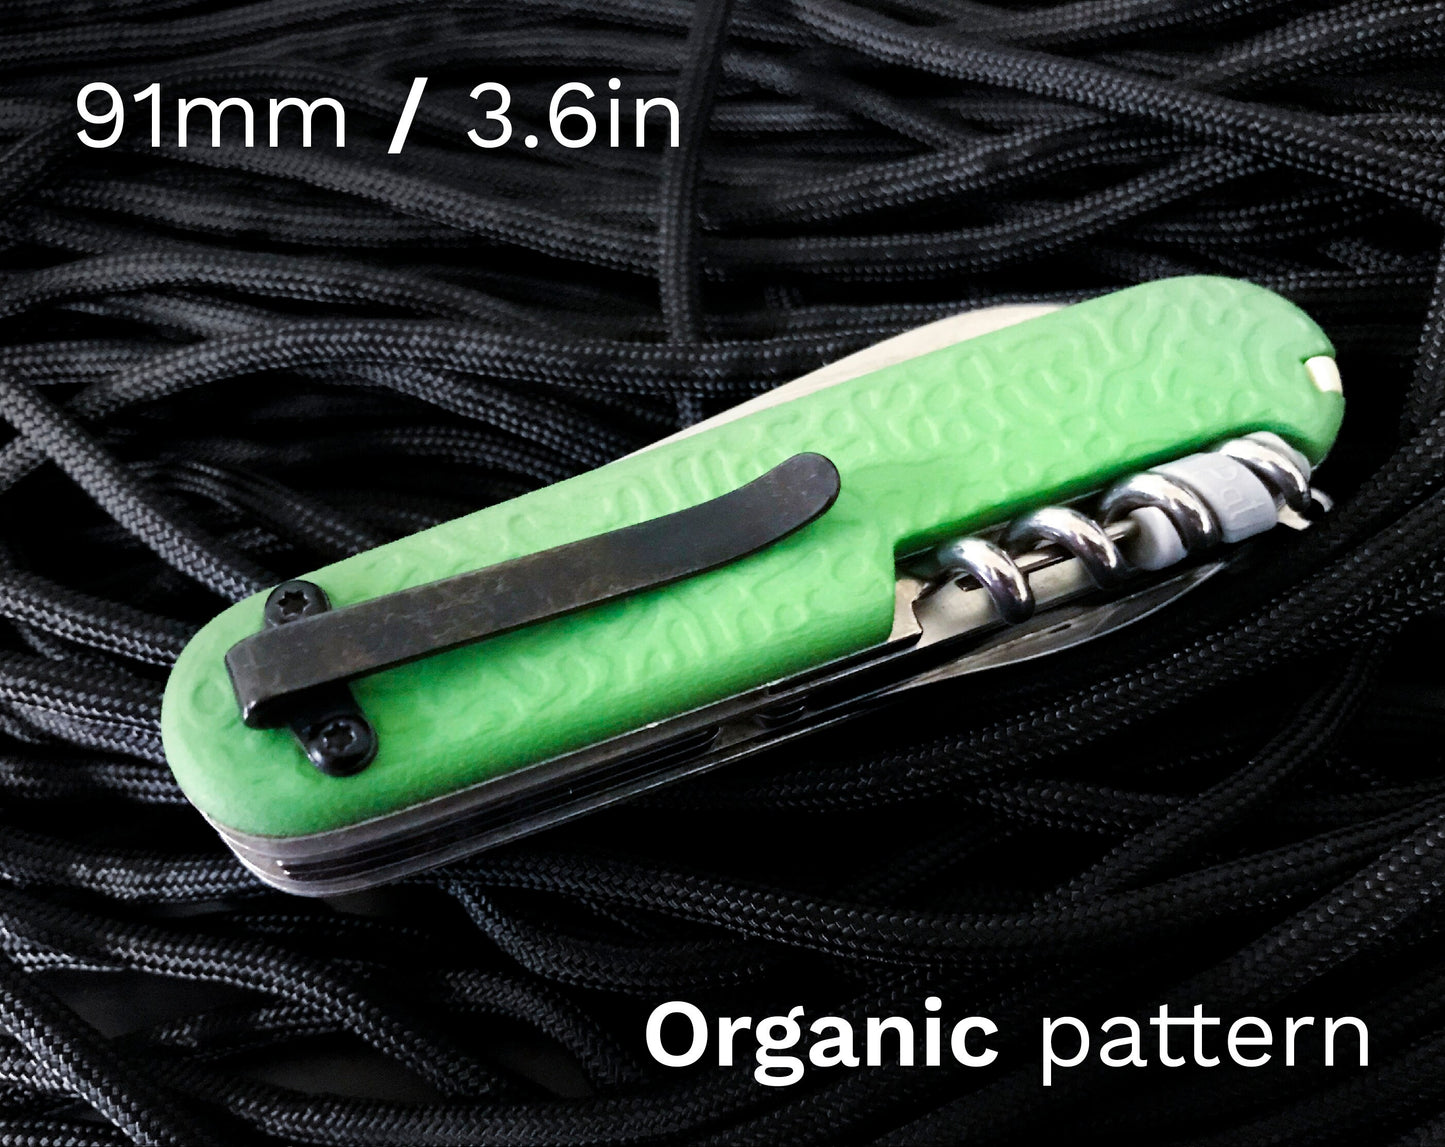 Swiss Army Knife Scales w/ Clip - 91mm/3.6in - ORGANIC pattern